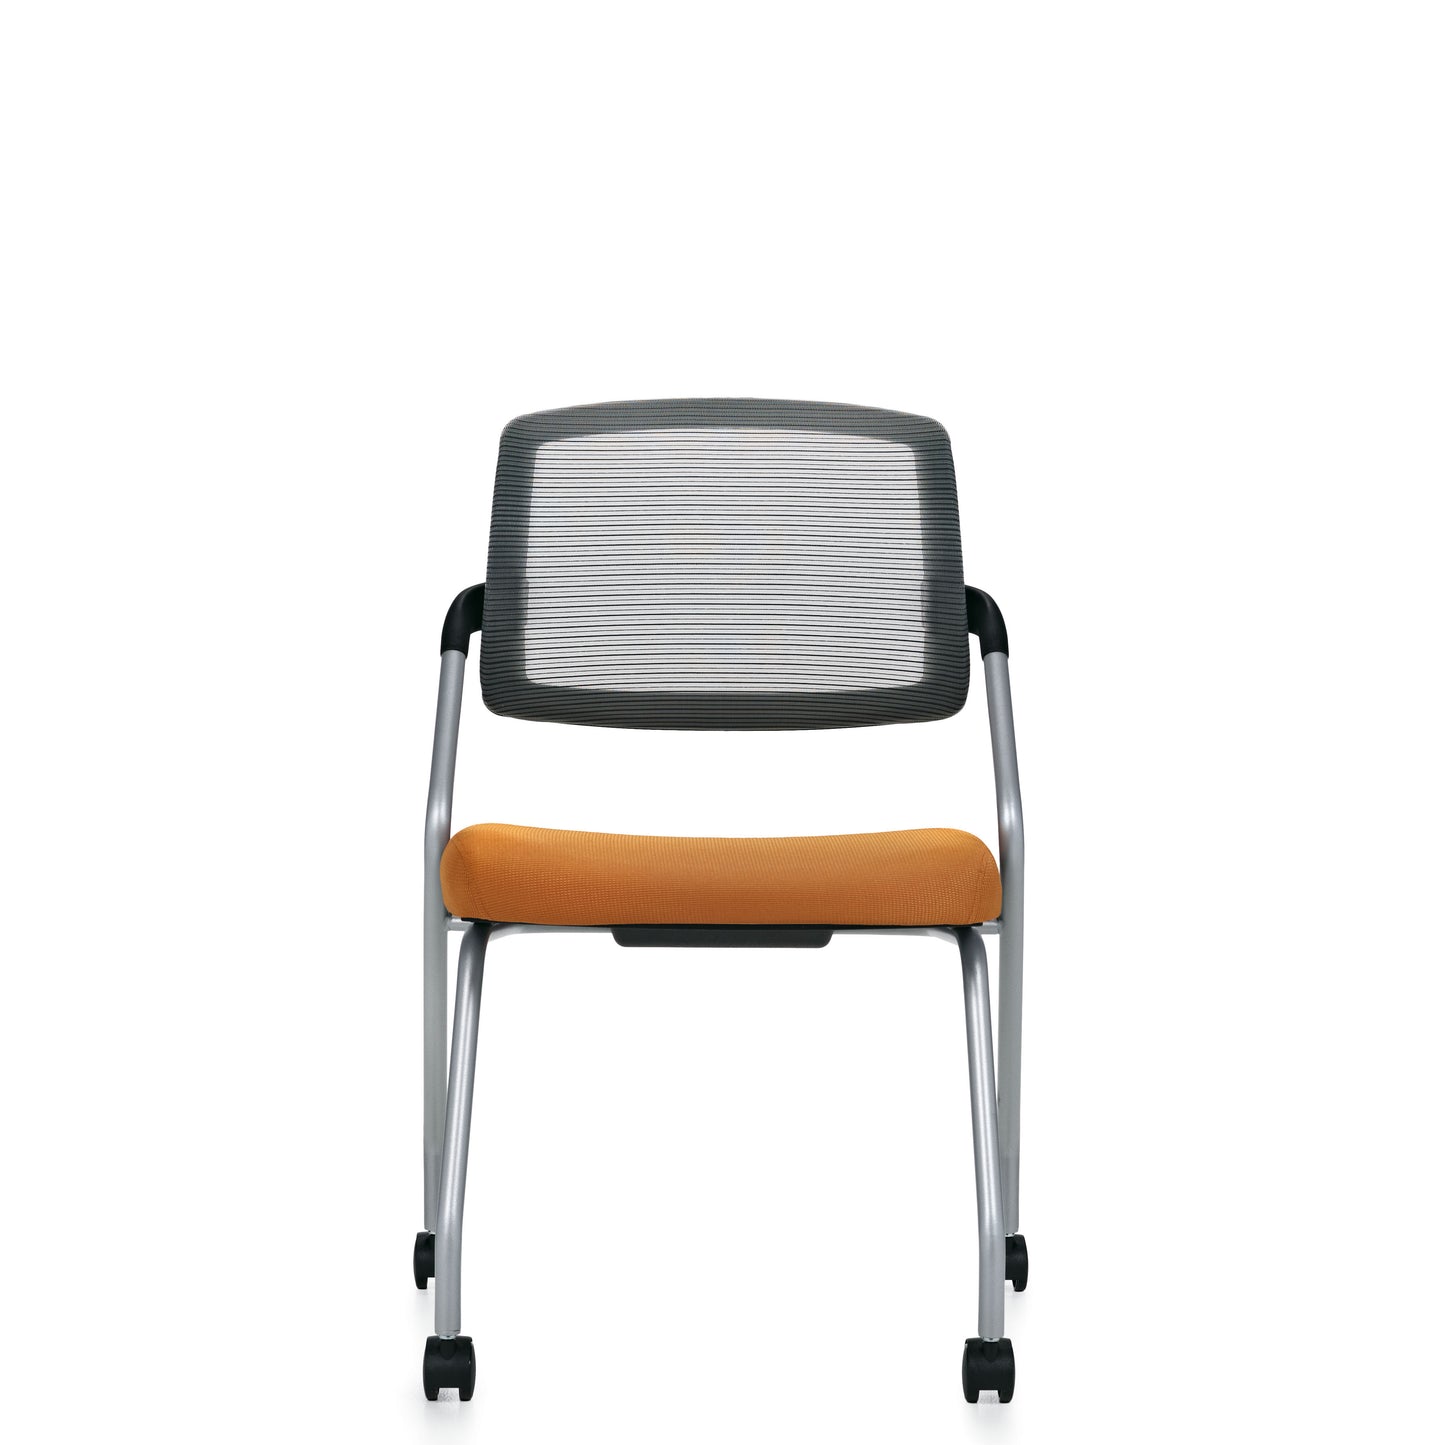 Global Spritz Armless Flip Seat Nesting Chair, Casters 6764C